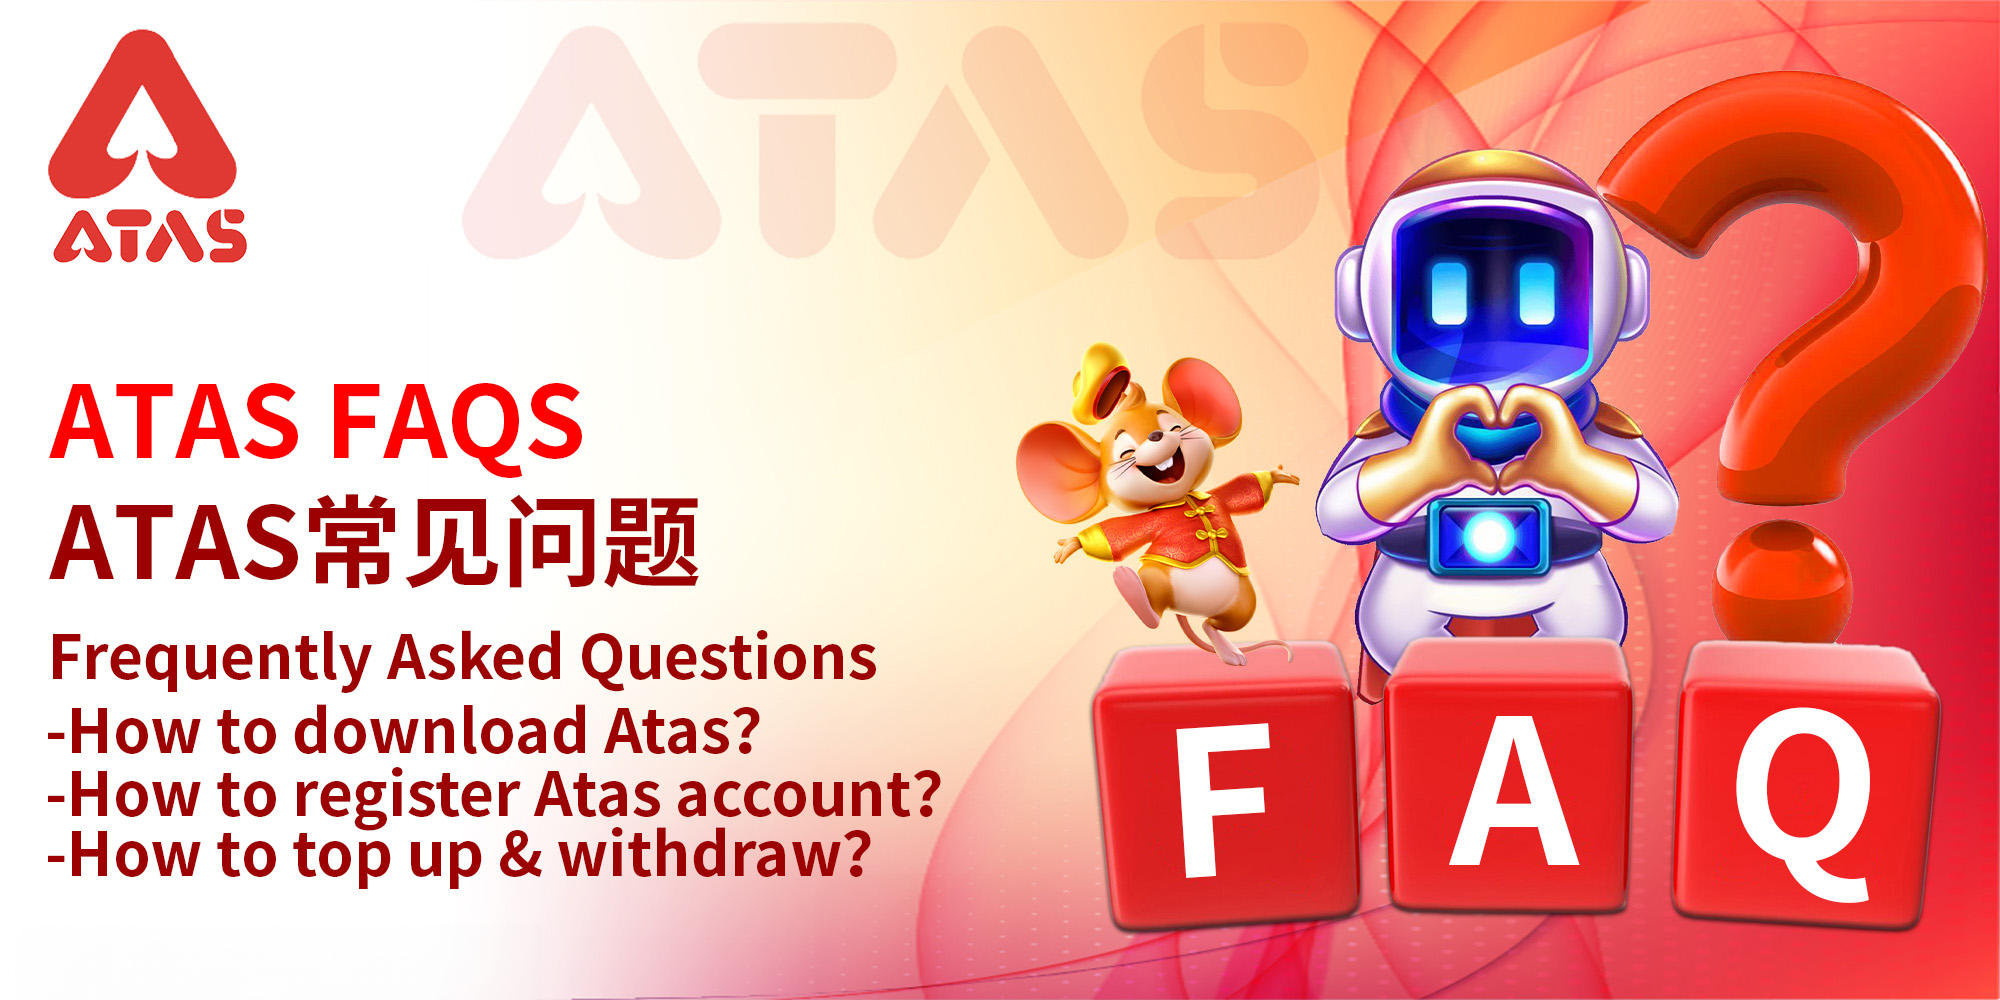 Atas casino frequently asked questions